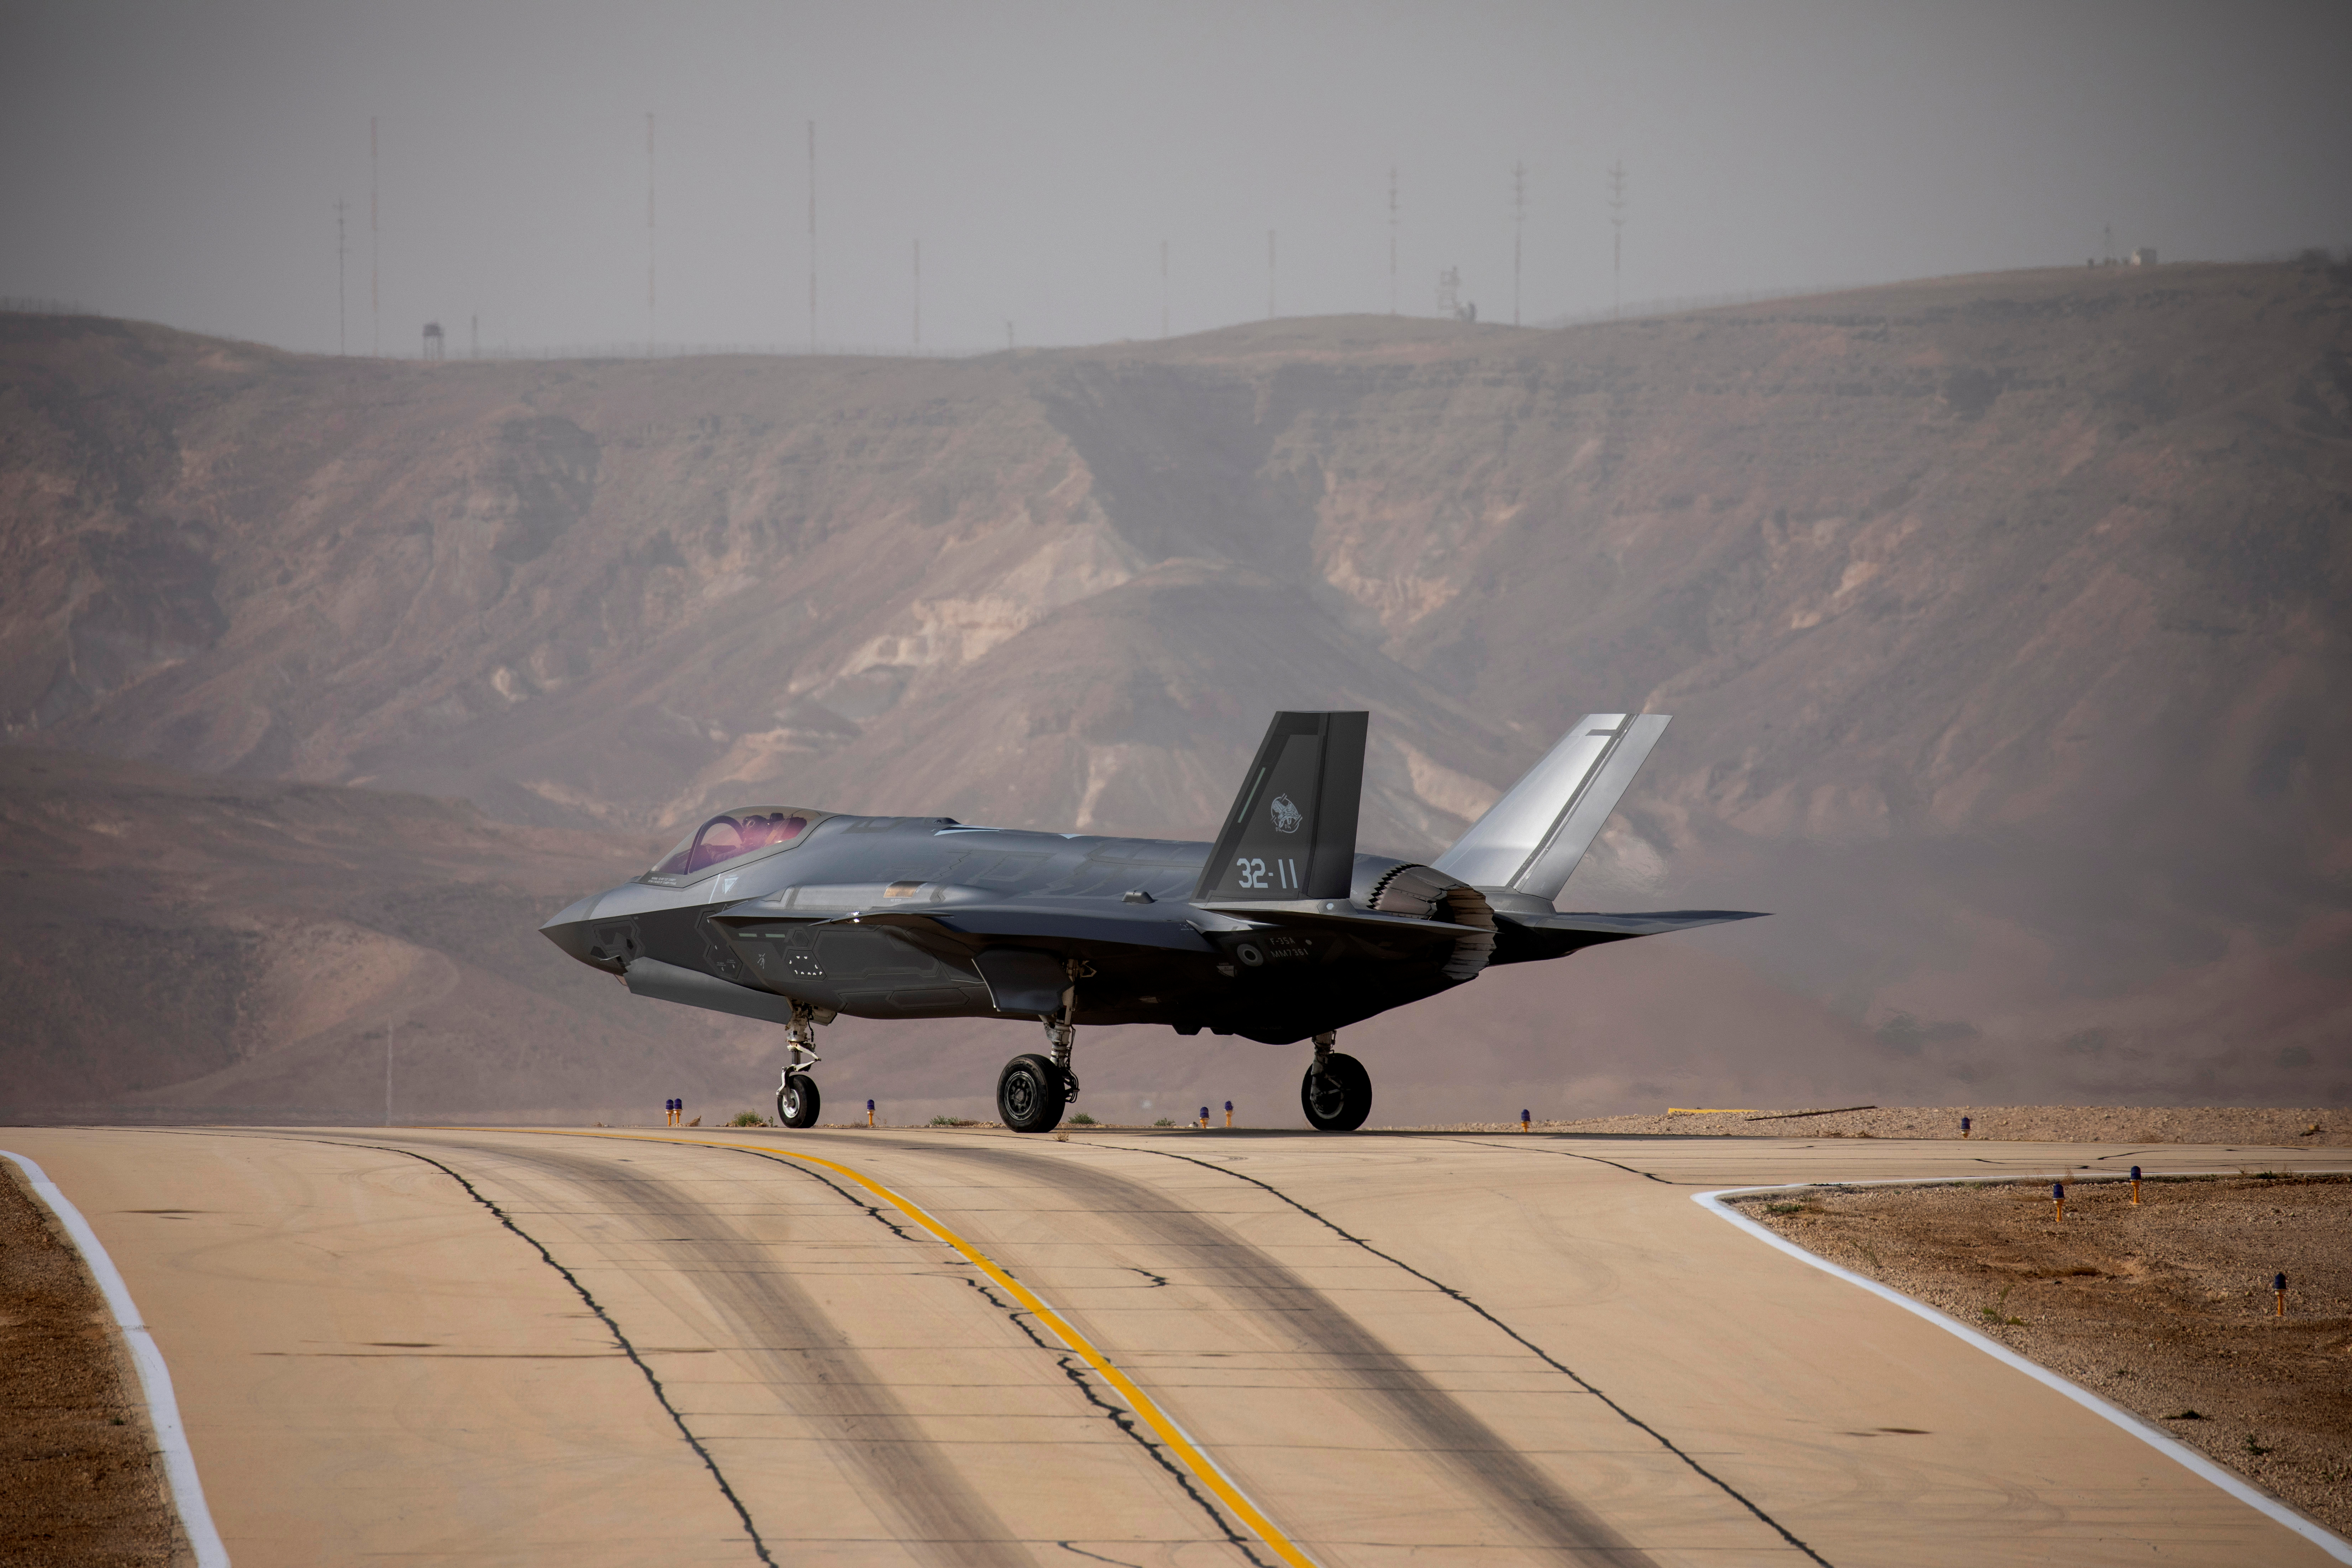 An Italian F35 aircraft is seen on the runway during "Blue Flag", an aerial exercise hosted by Israel with the participation of foreign air force crews, at Ovda military air base, southern Israel